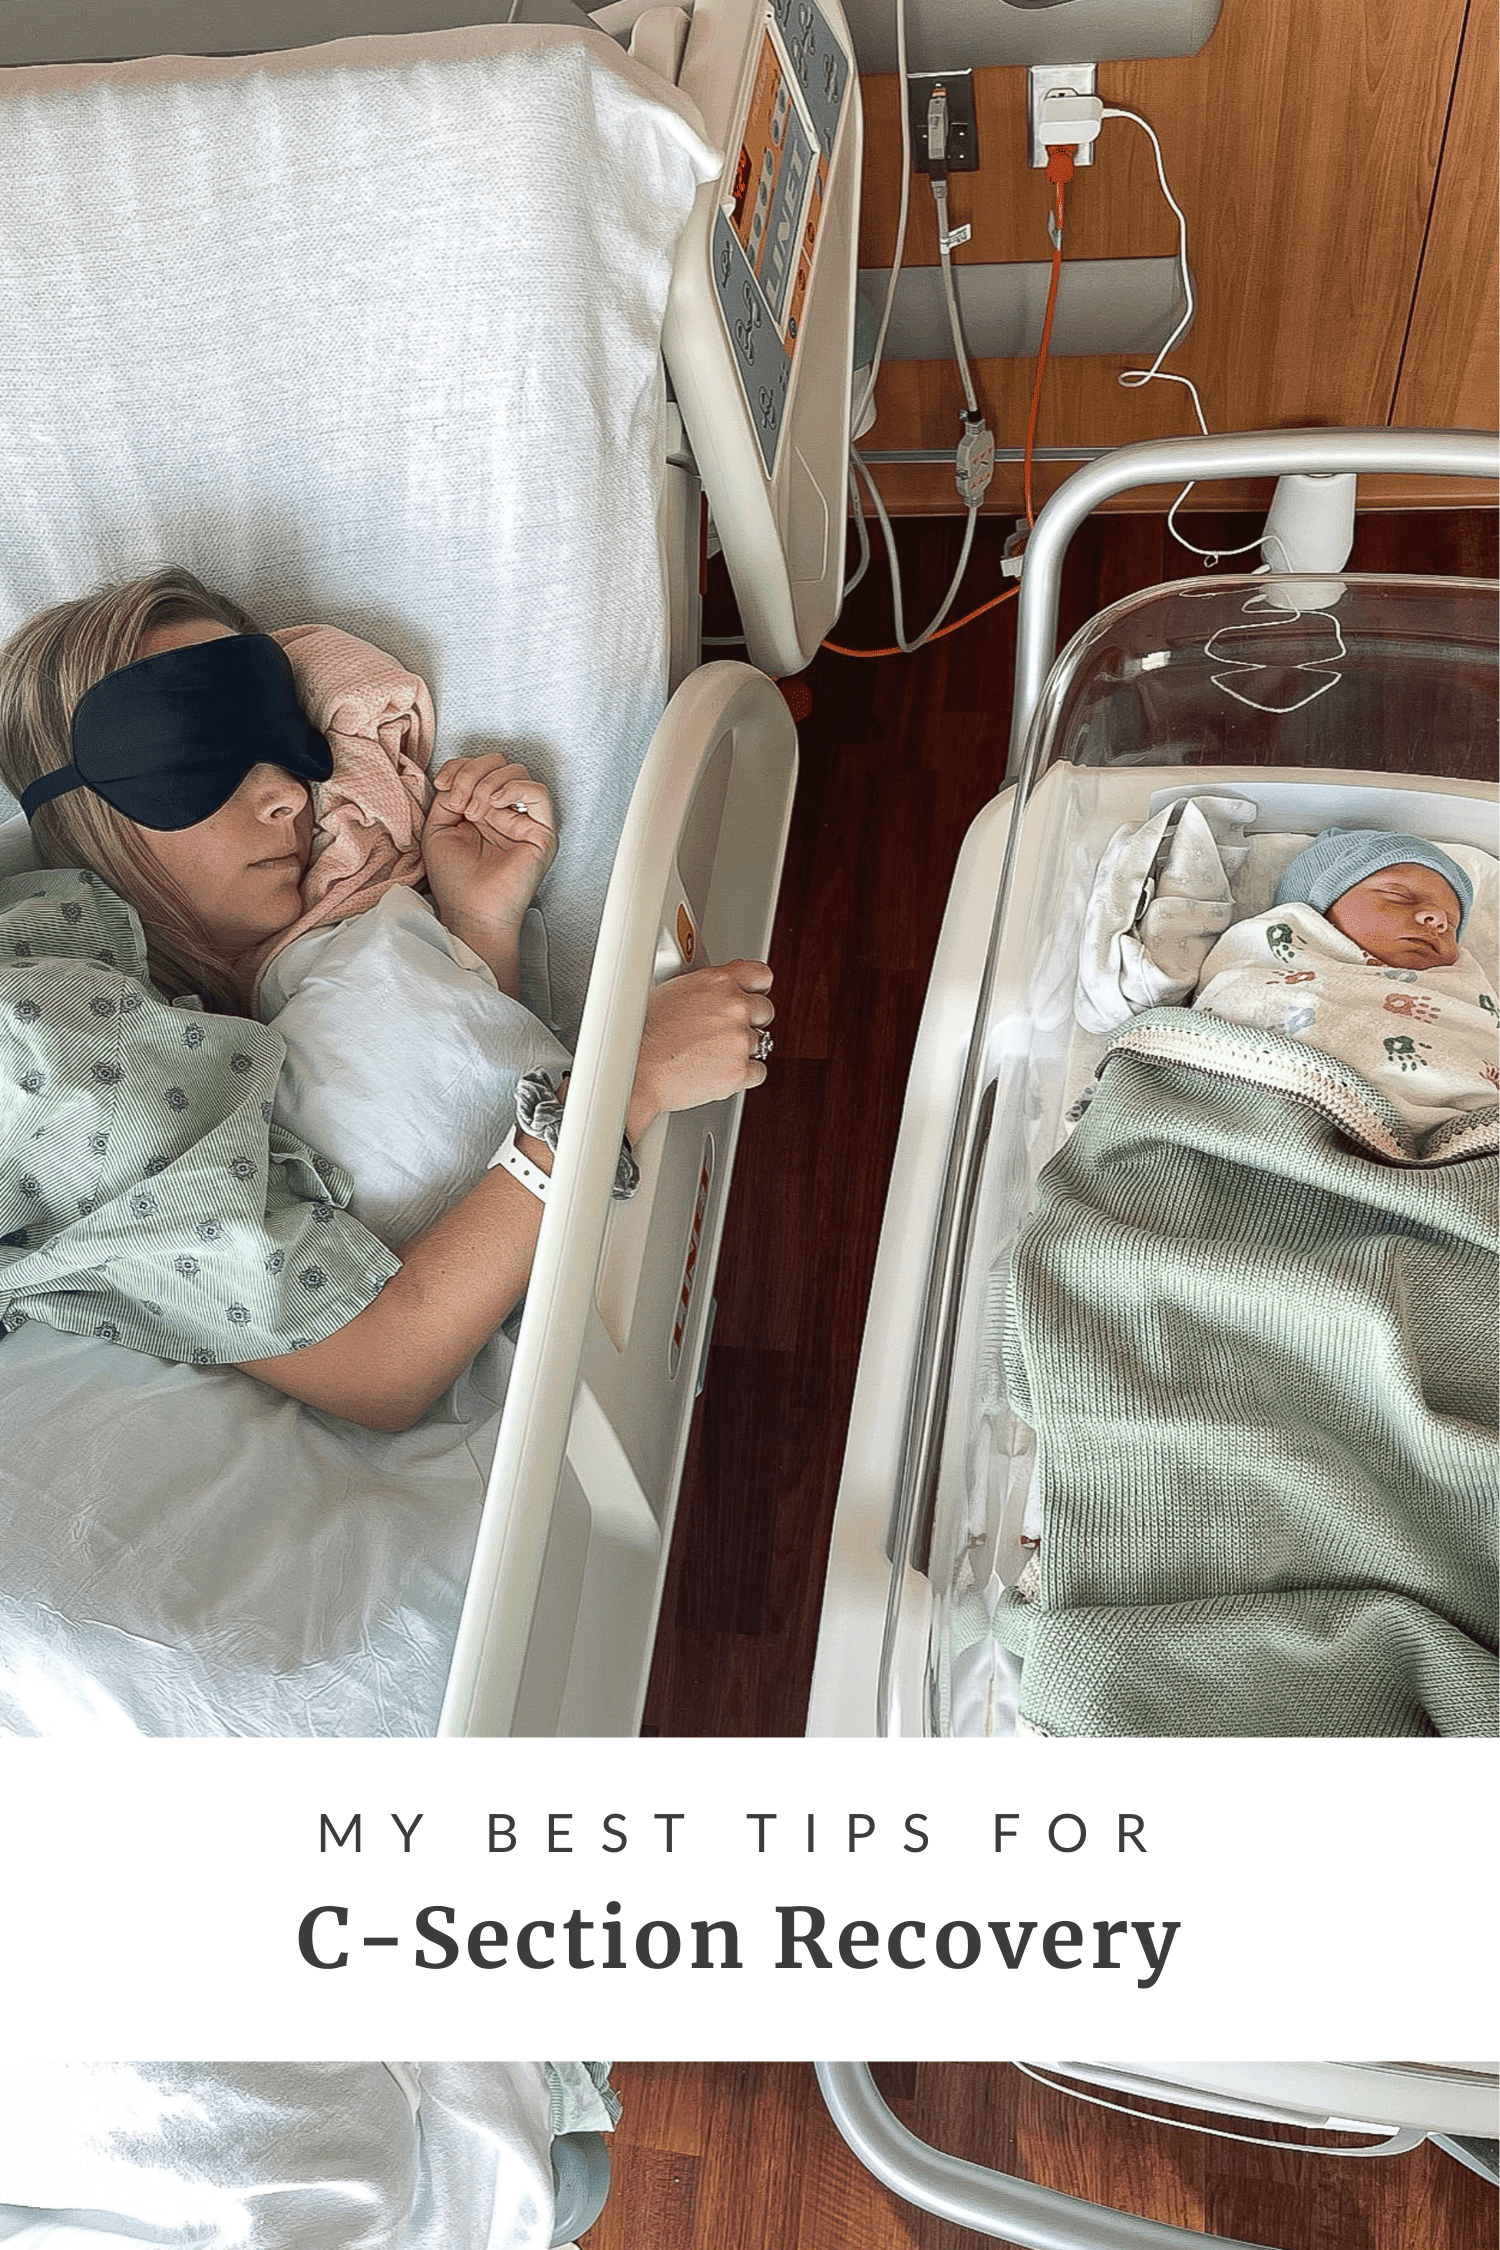 My best c-section recovery tips